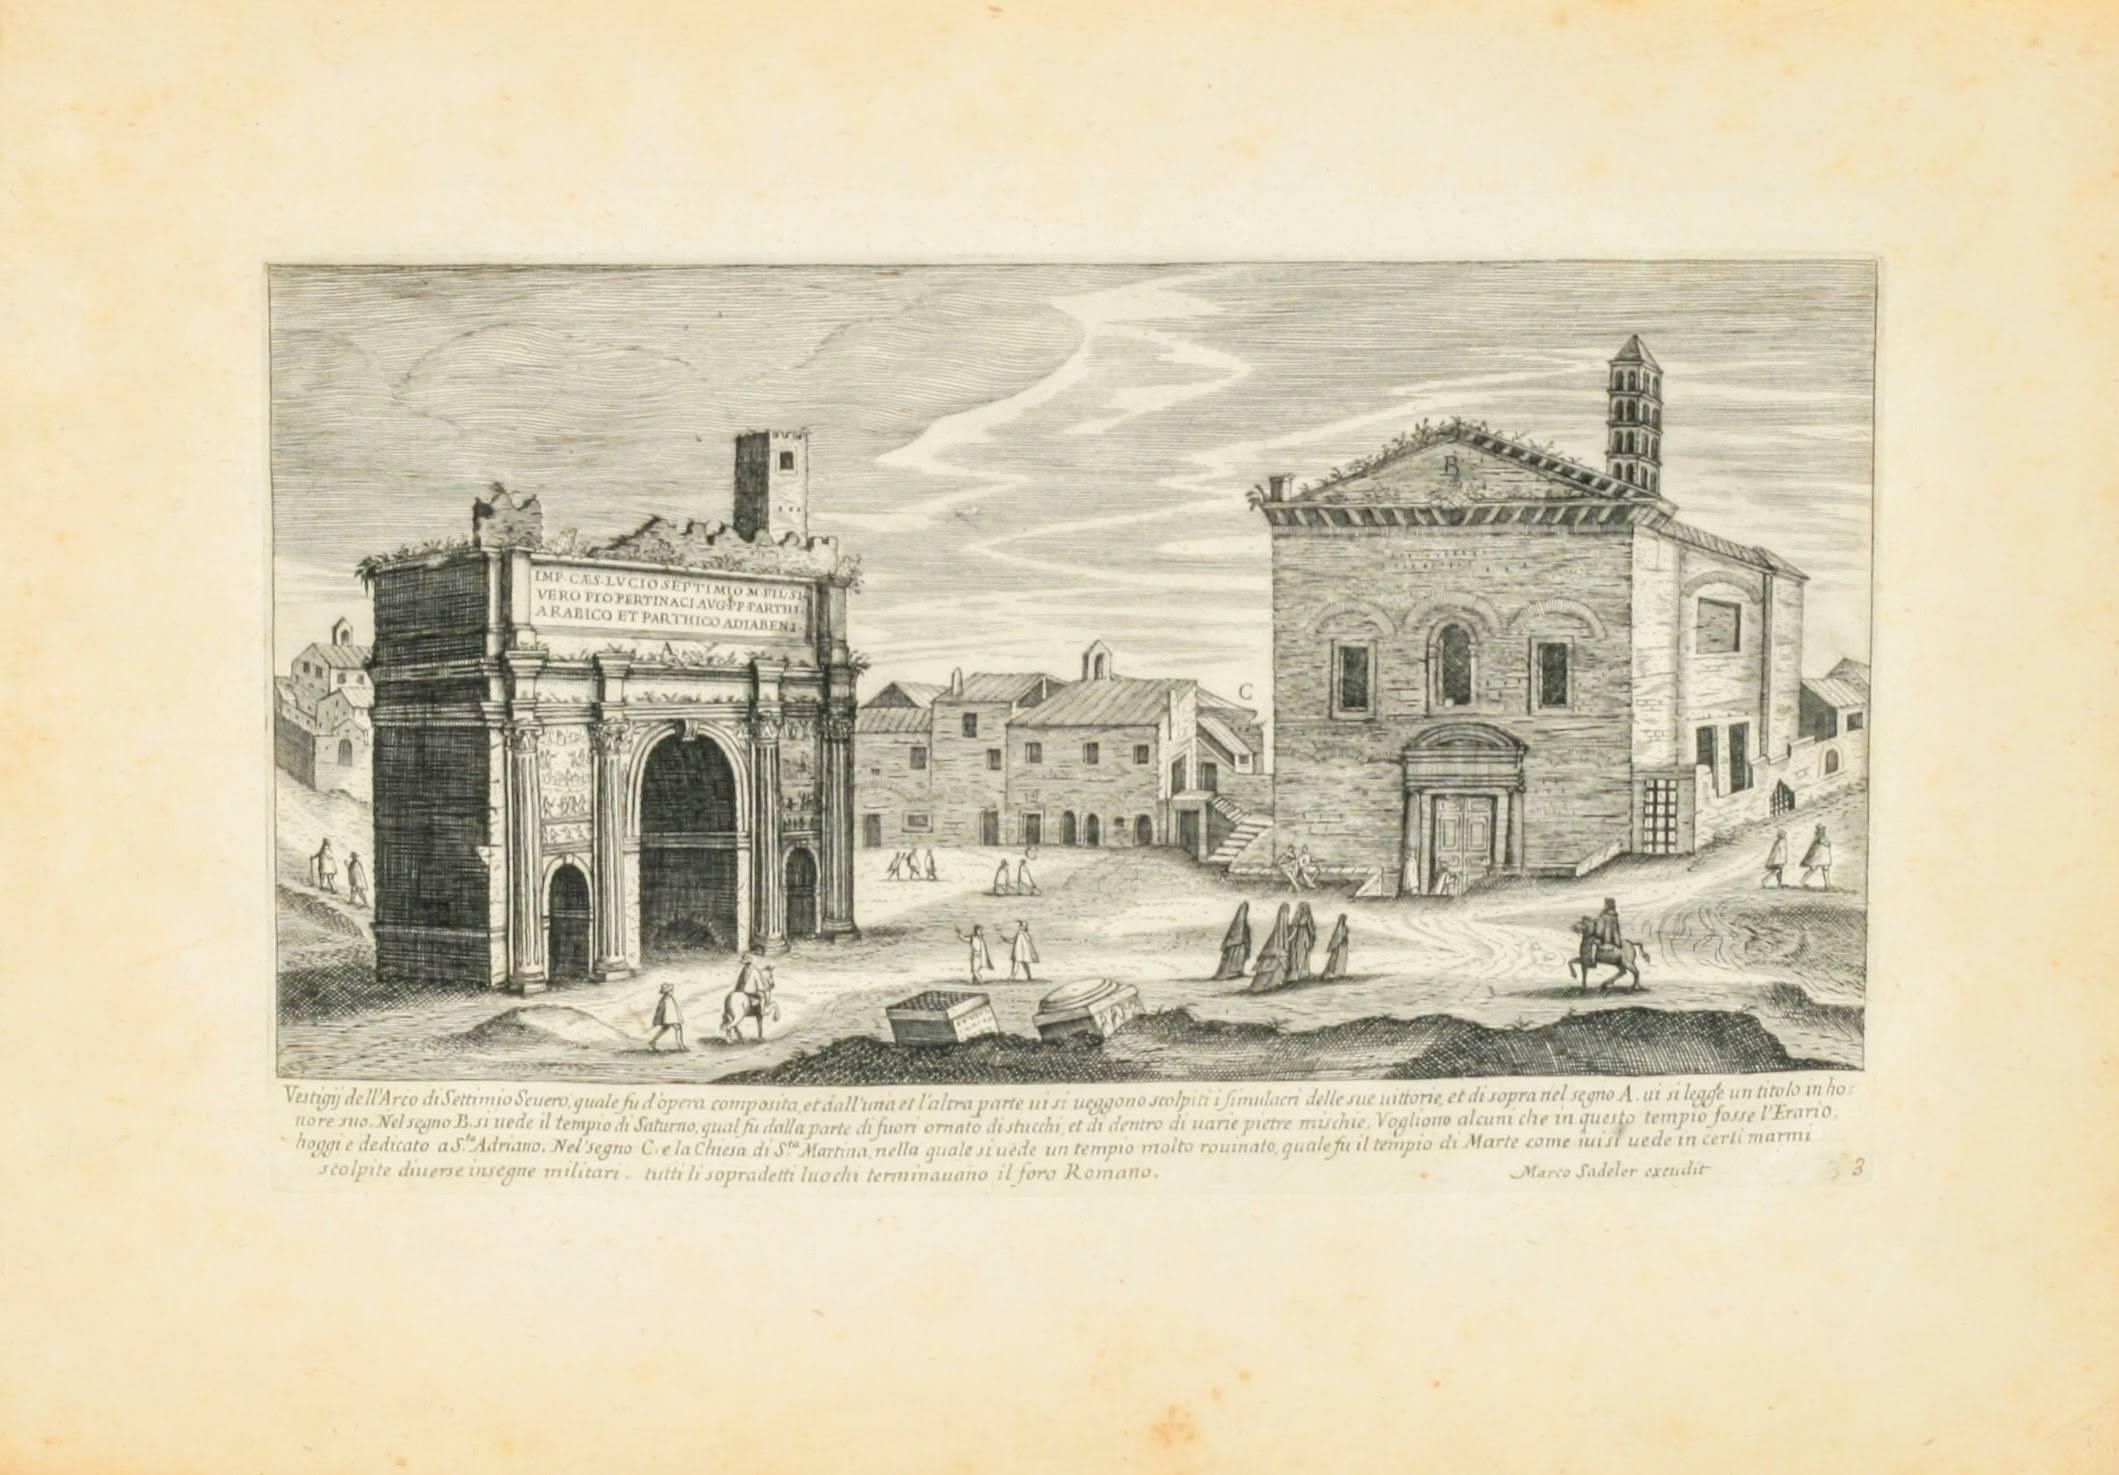 Beautiful 1660 engraving of the Roman Forum, the Capitoline Hill, and the Arch of Septimus Severus, by Marco Sadeler.

Exquisite original engraving from 1660 of Rome showing parts of the Capitoline Hill, The Roman Forum, and the Arch of Septimus